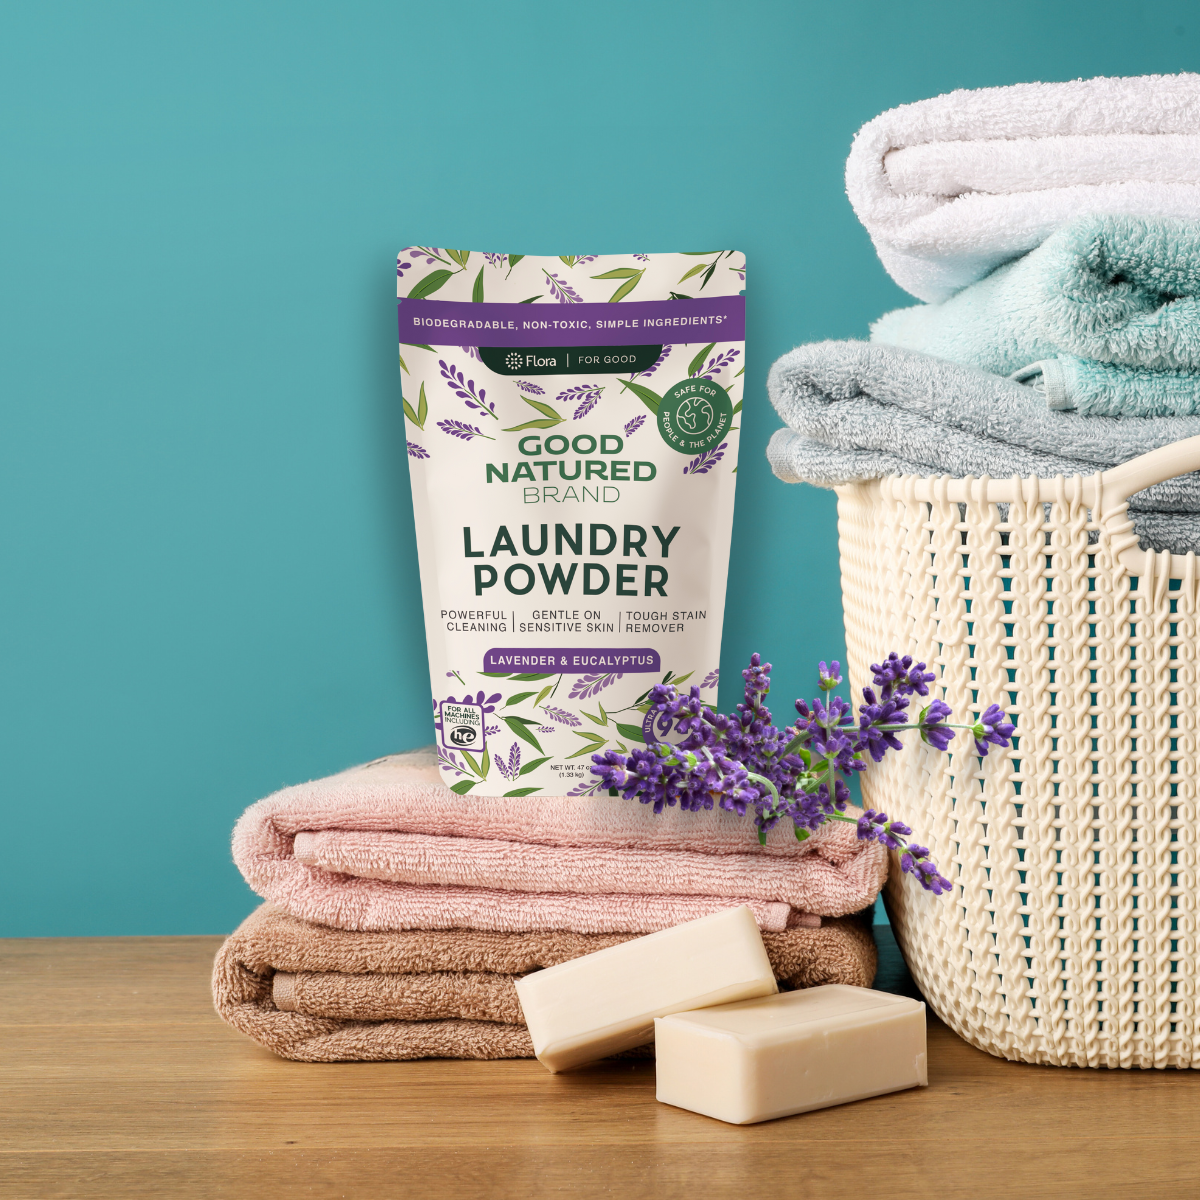 Green Laundry: 5 Sustainable Hacks for Busy Moms!